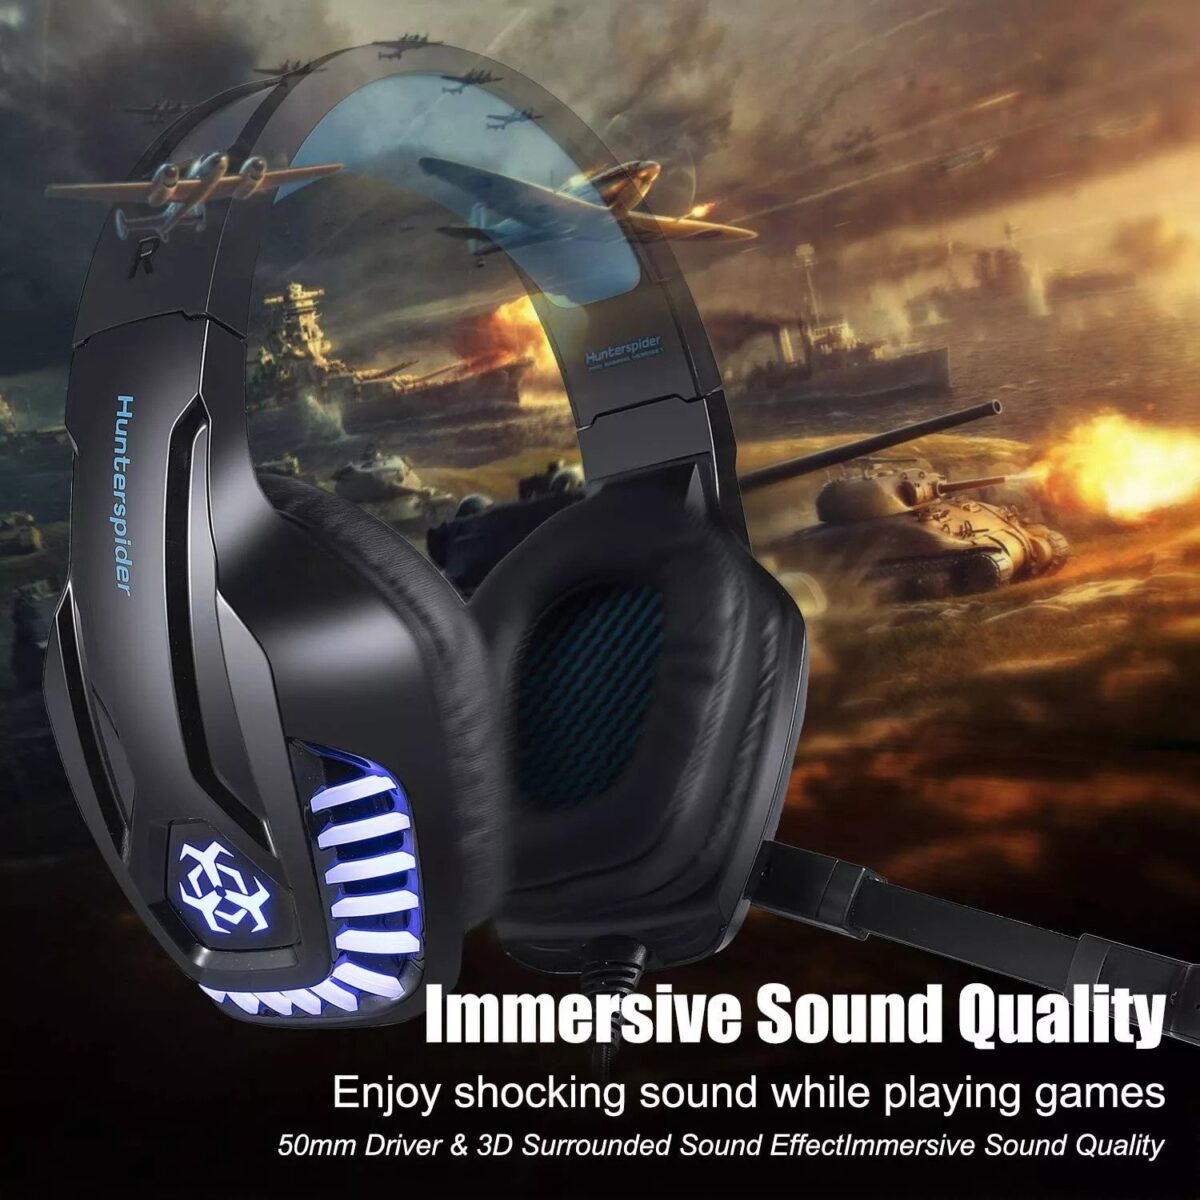 Hunterspider Pro Gaming Headset 4D Surrounded Stereo Sound 3.5mm 4Pin with Noise Canceling Mic & LED Light - Supports Mobiles, Tablets, Laptops, PS4, Xbox One – Model: V-6